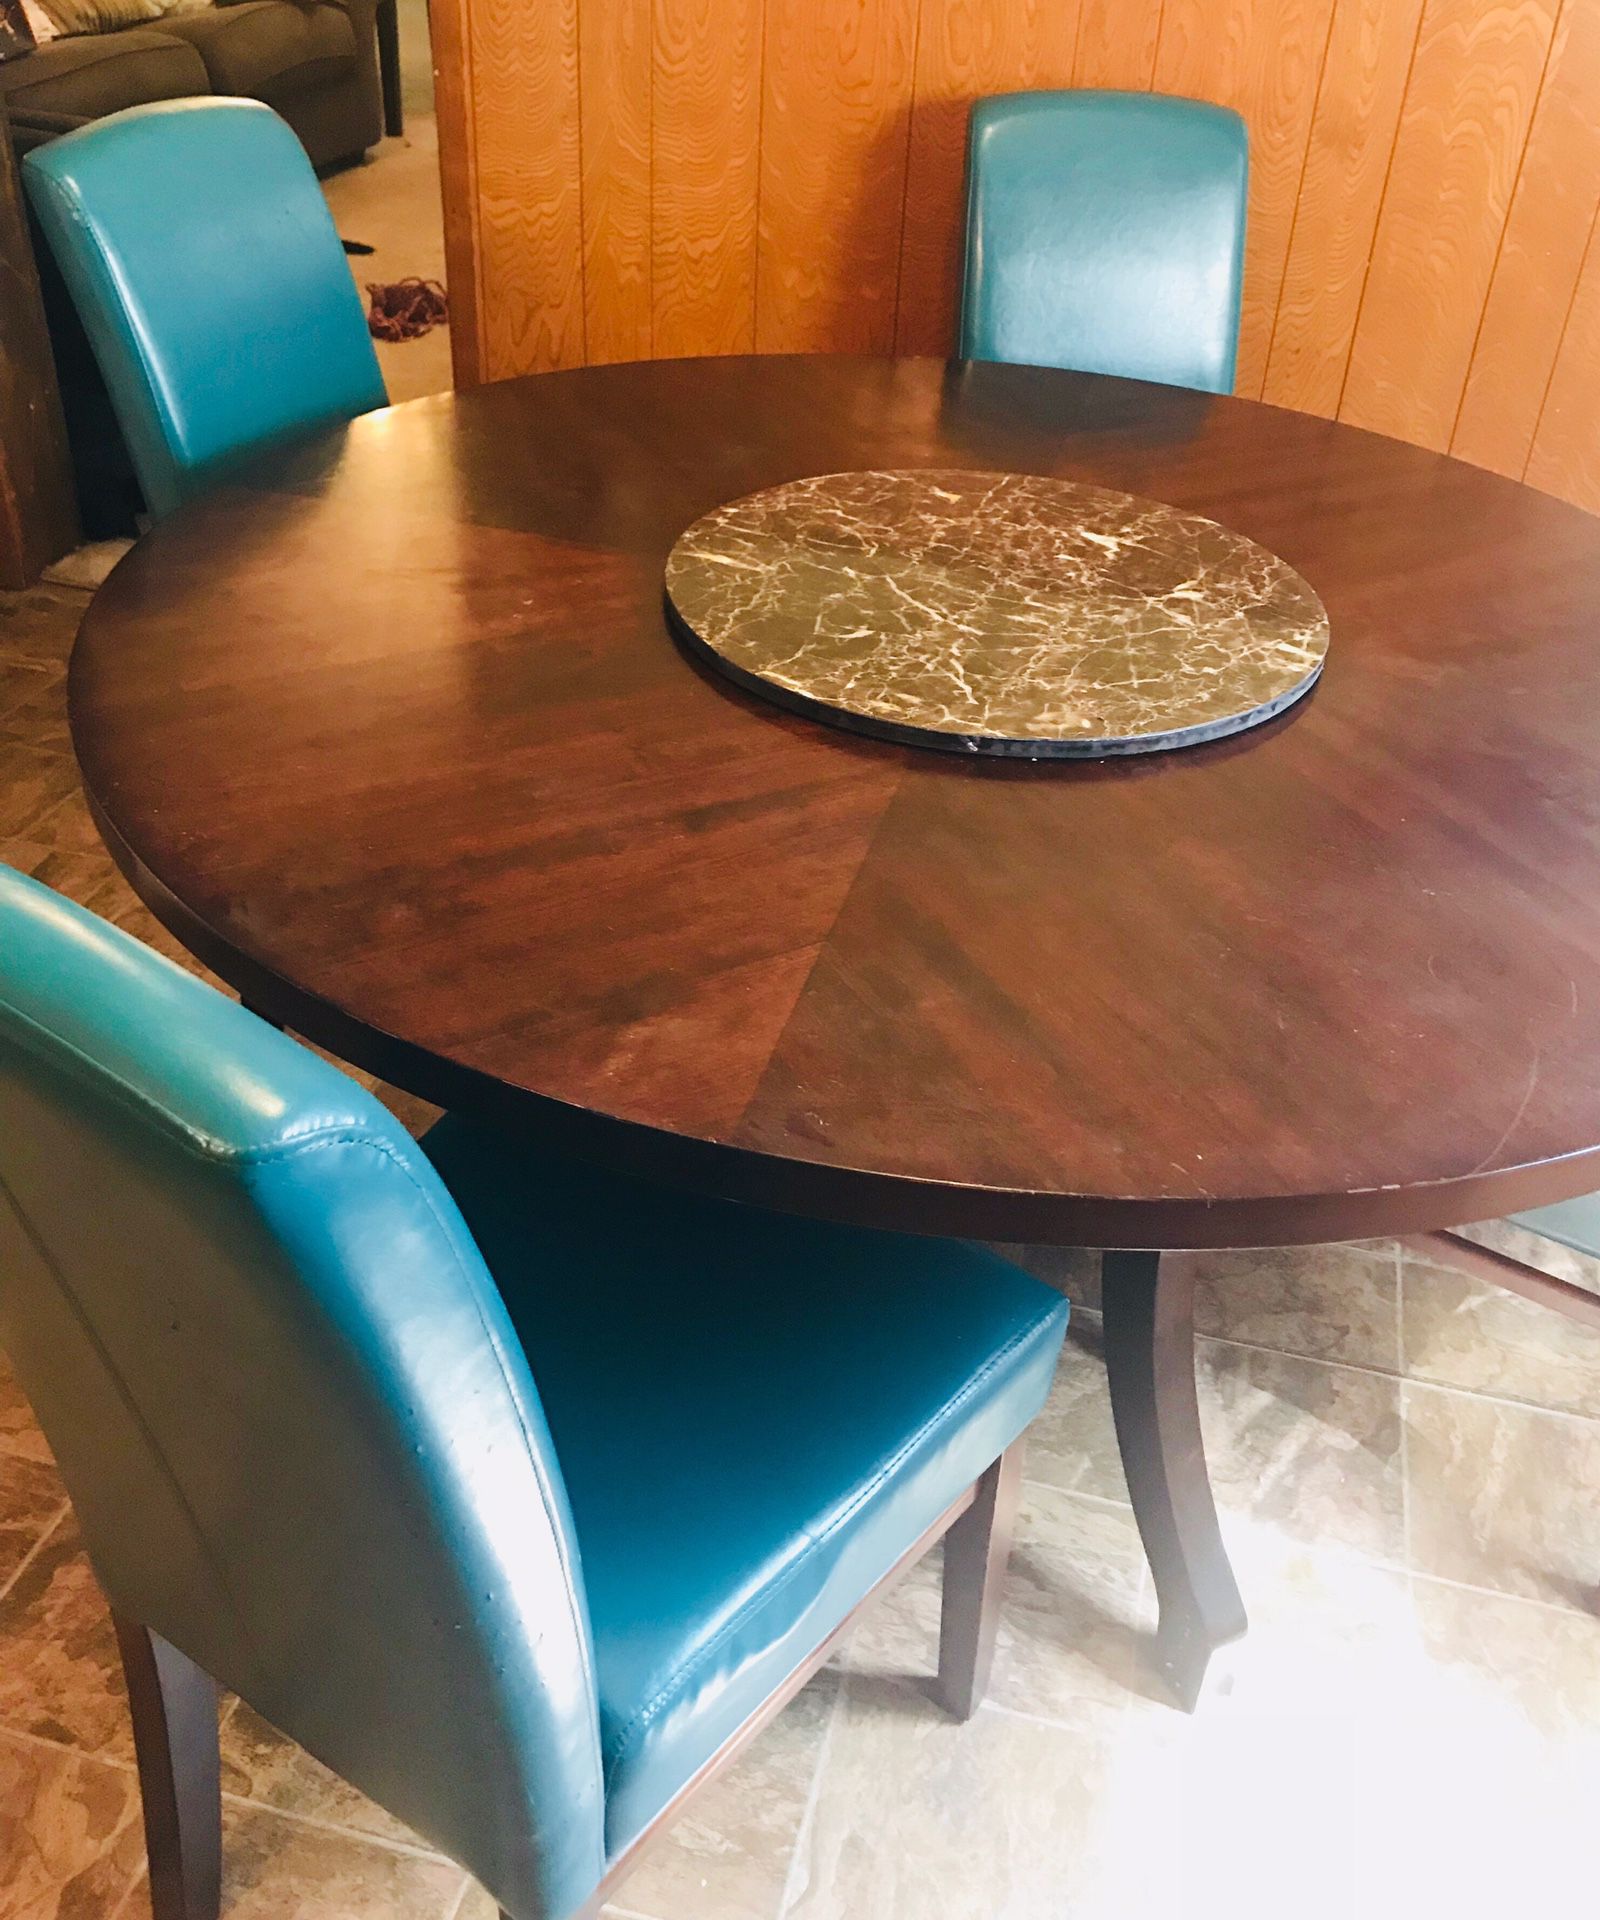 Round dining room table